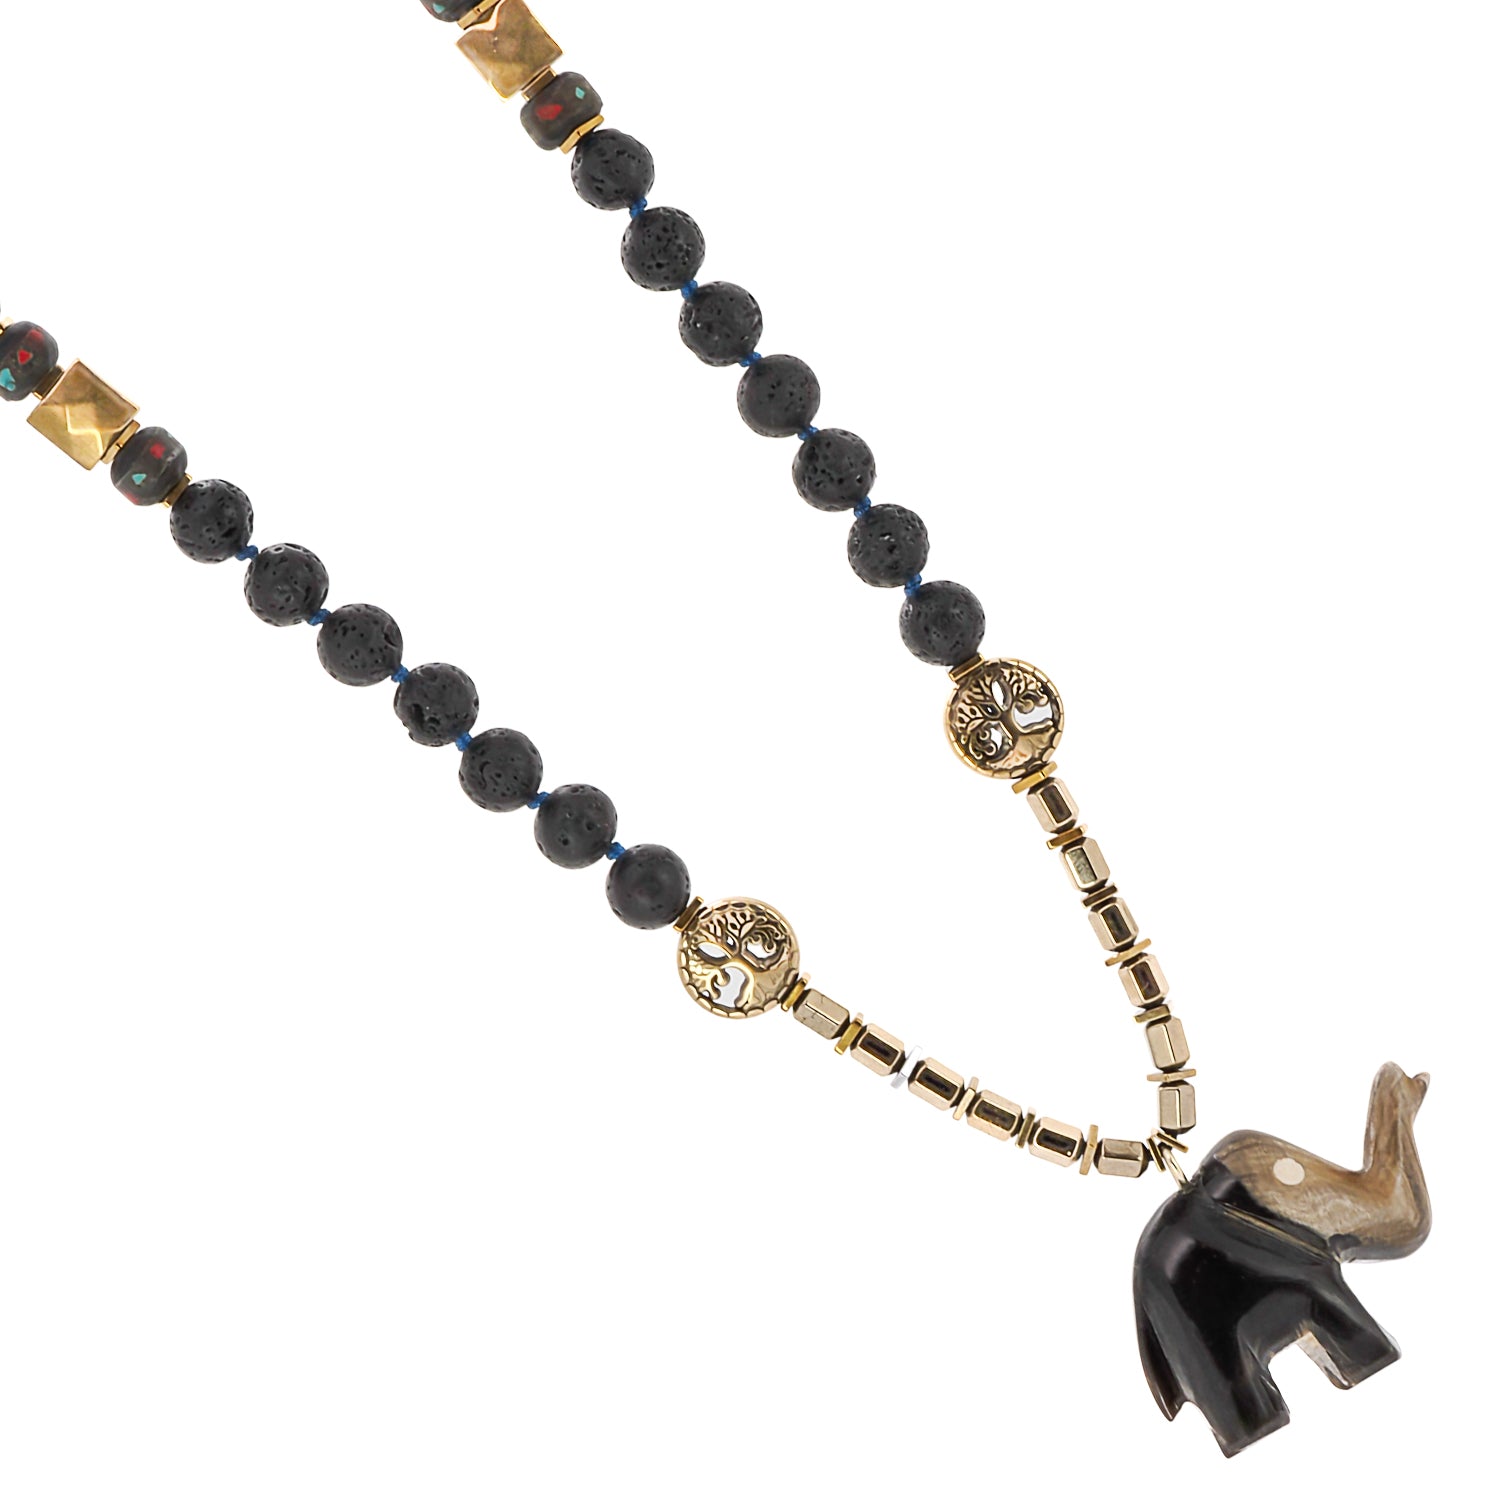 Capture the beauty of the Spiritual Nepal Elephant Necklace, a symbol of strength and good luck